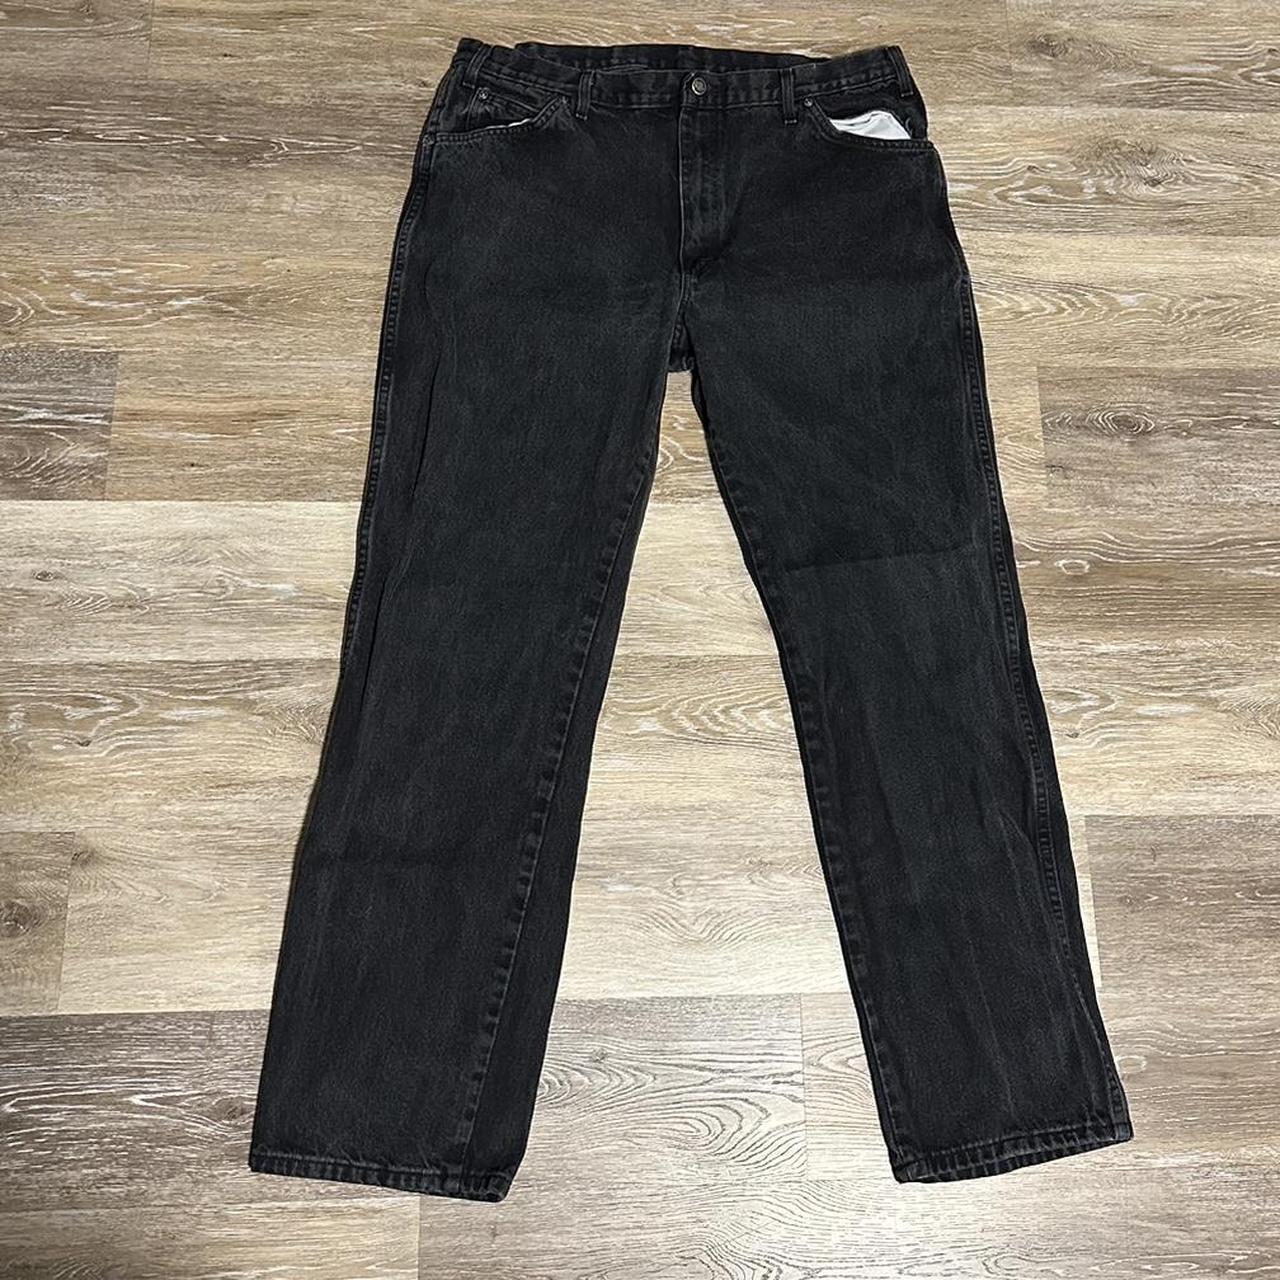 Dickies Black Jeans - Condition 10/10 - Size 40 x... - Depop